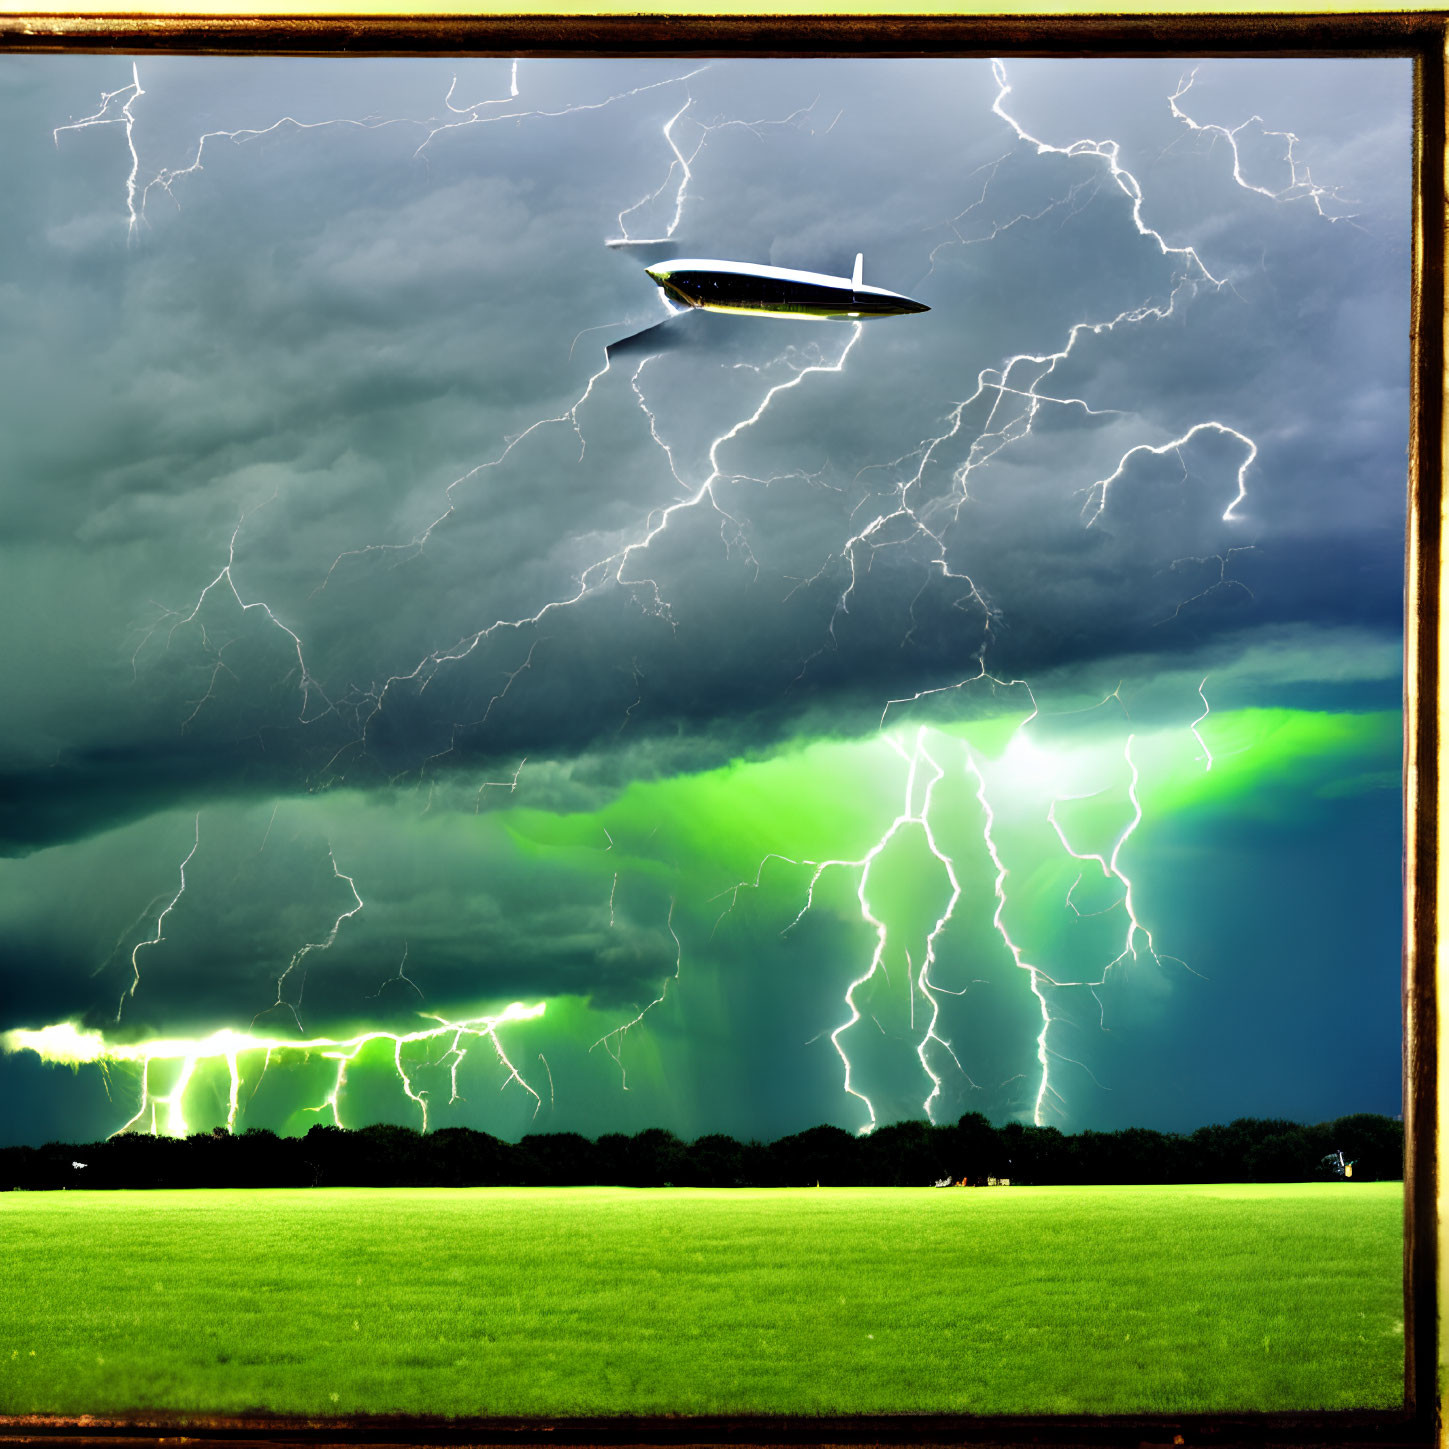 Glider flying amidst lightning strikes and storm clouds in greenish hue